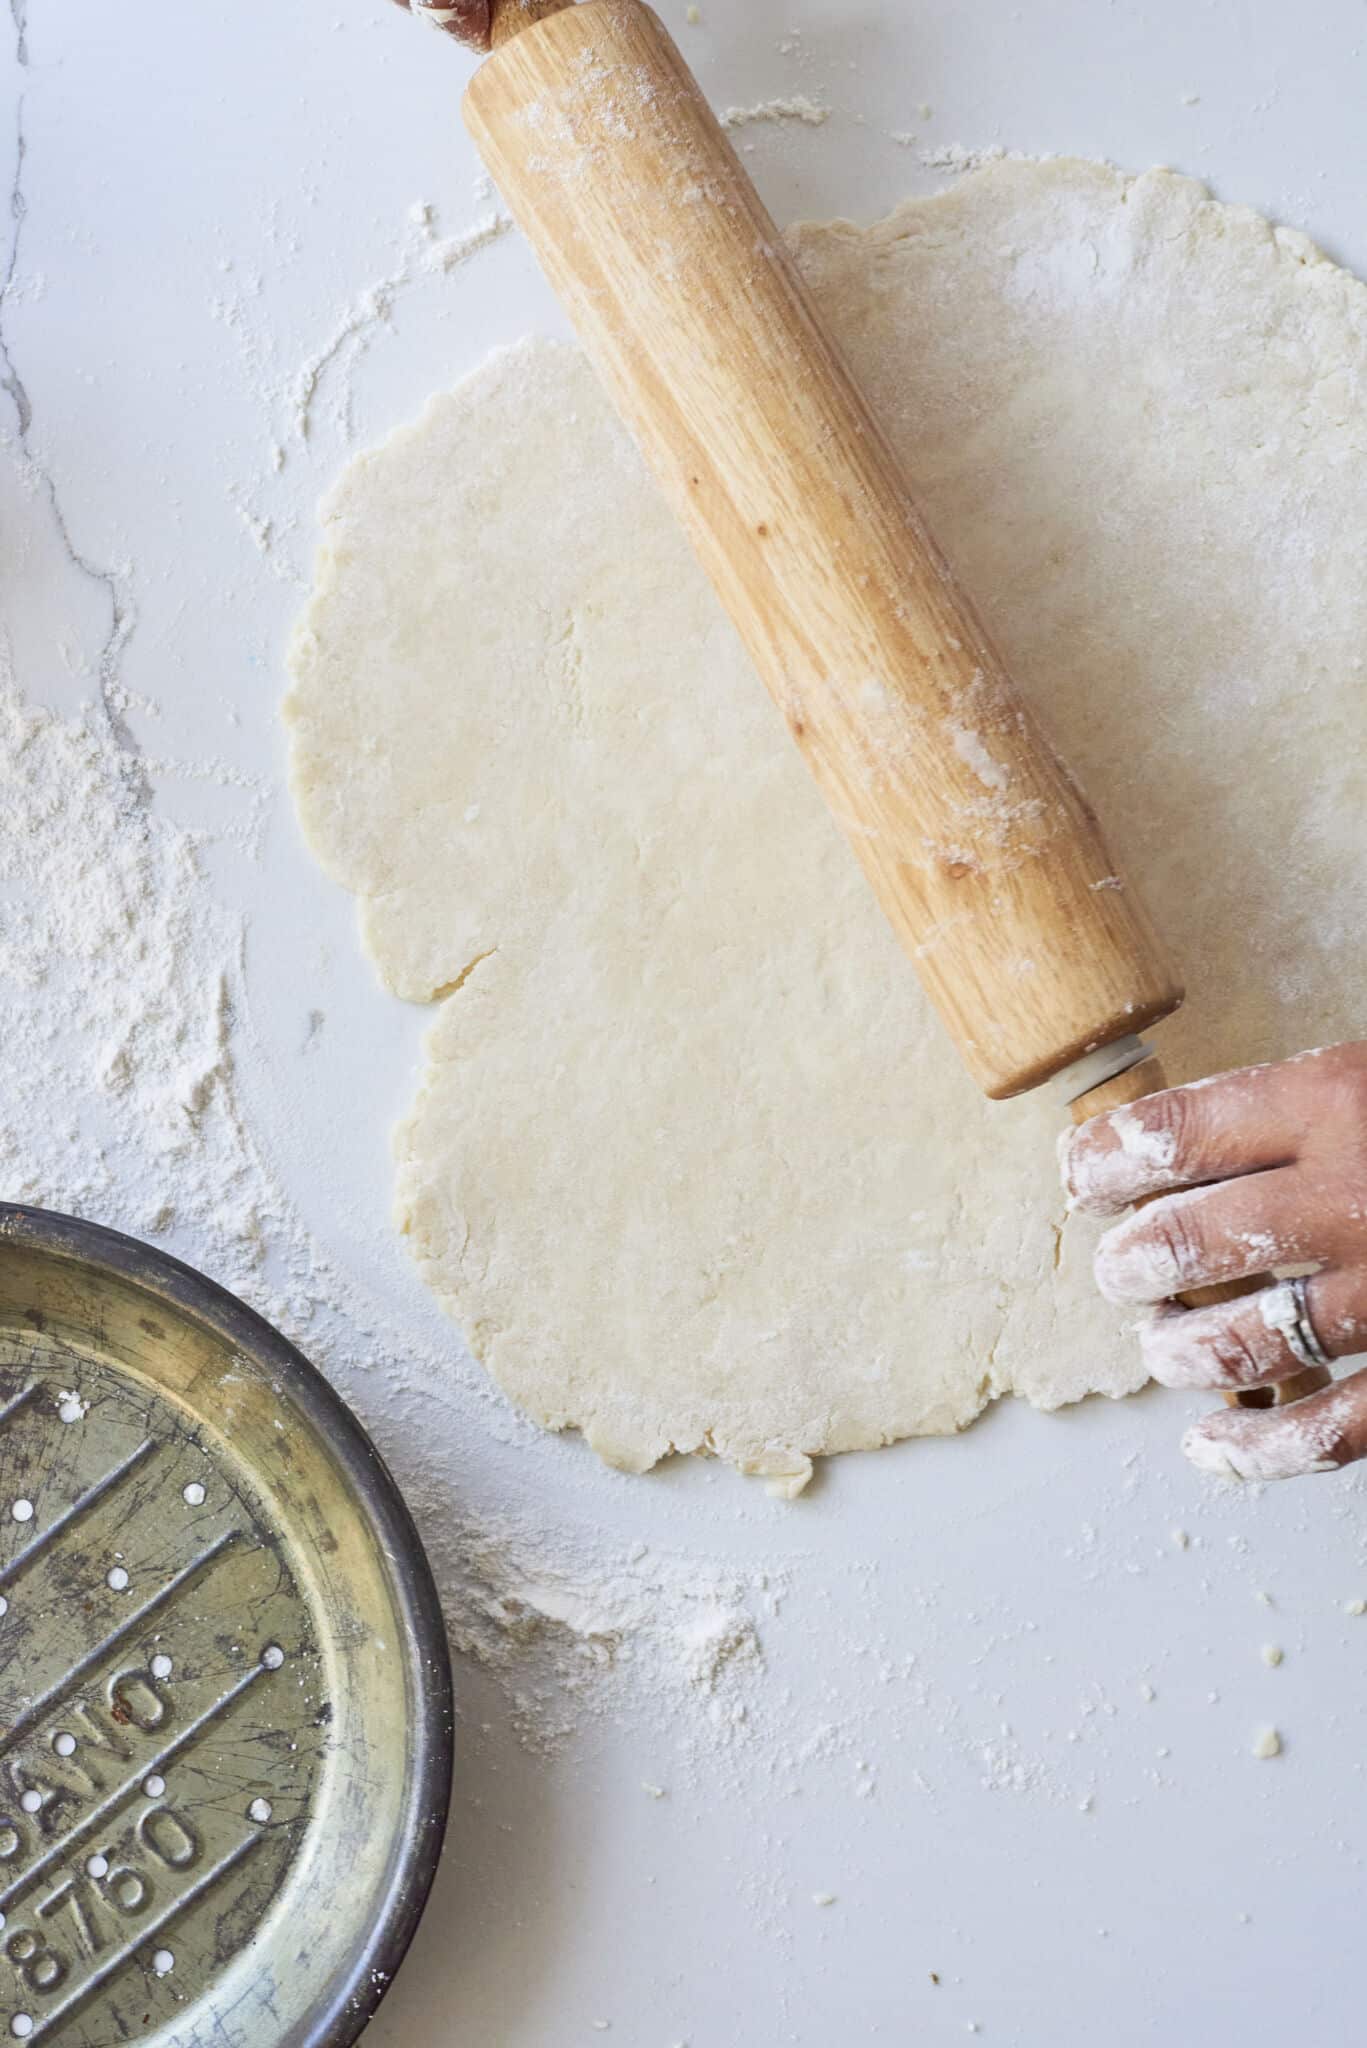 An image from overhead shows a rolling pin flattening pie crust to be placed into a pie pan off to the side.